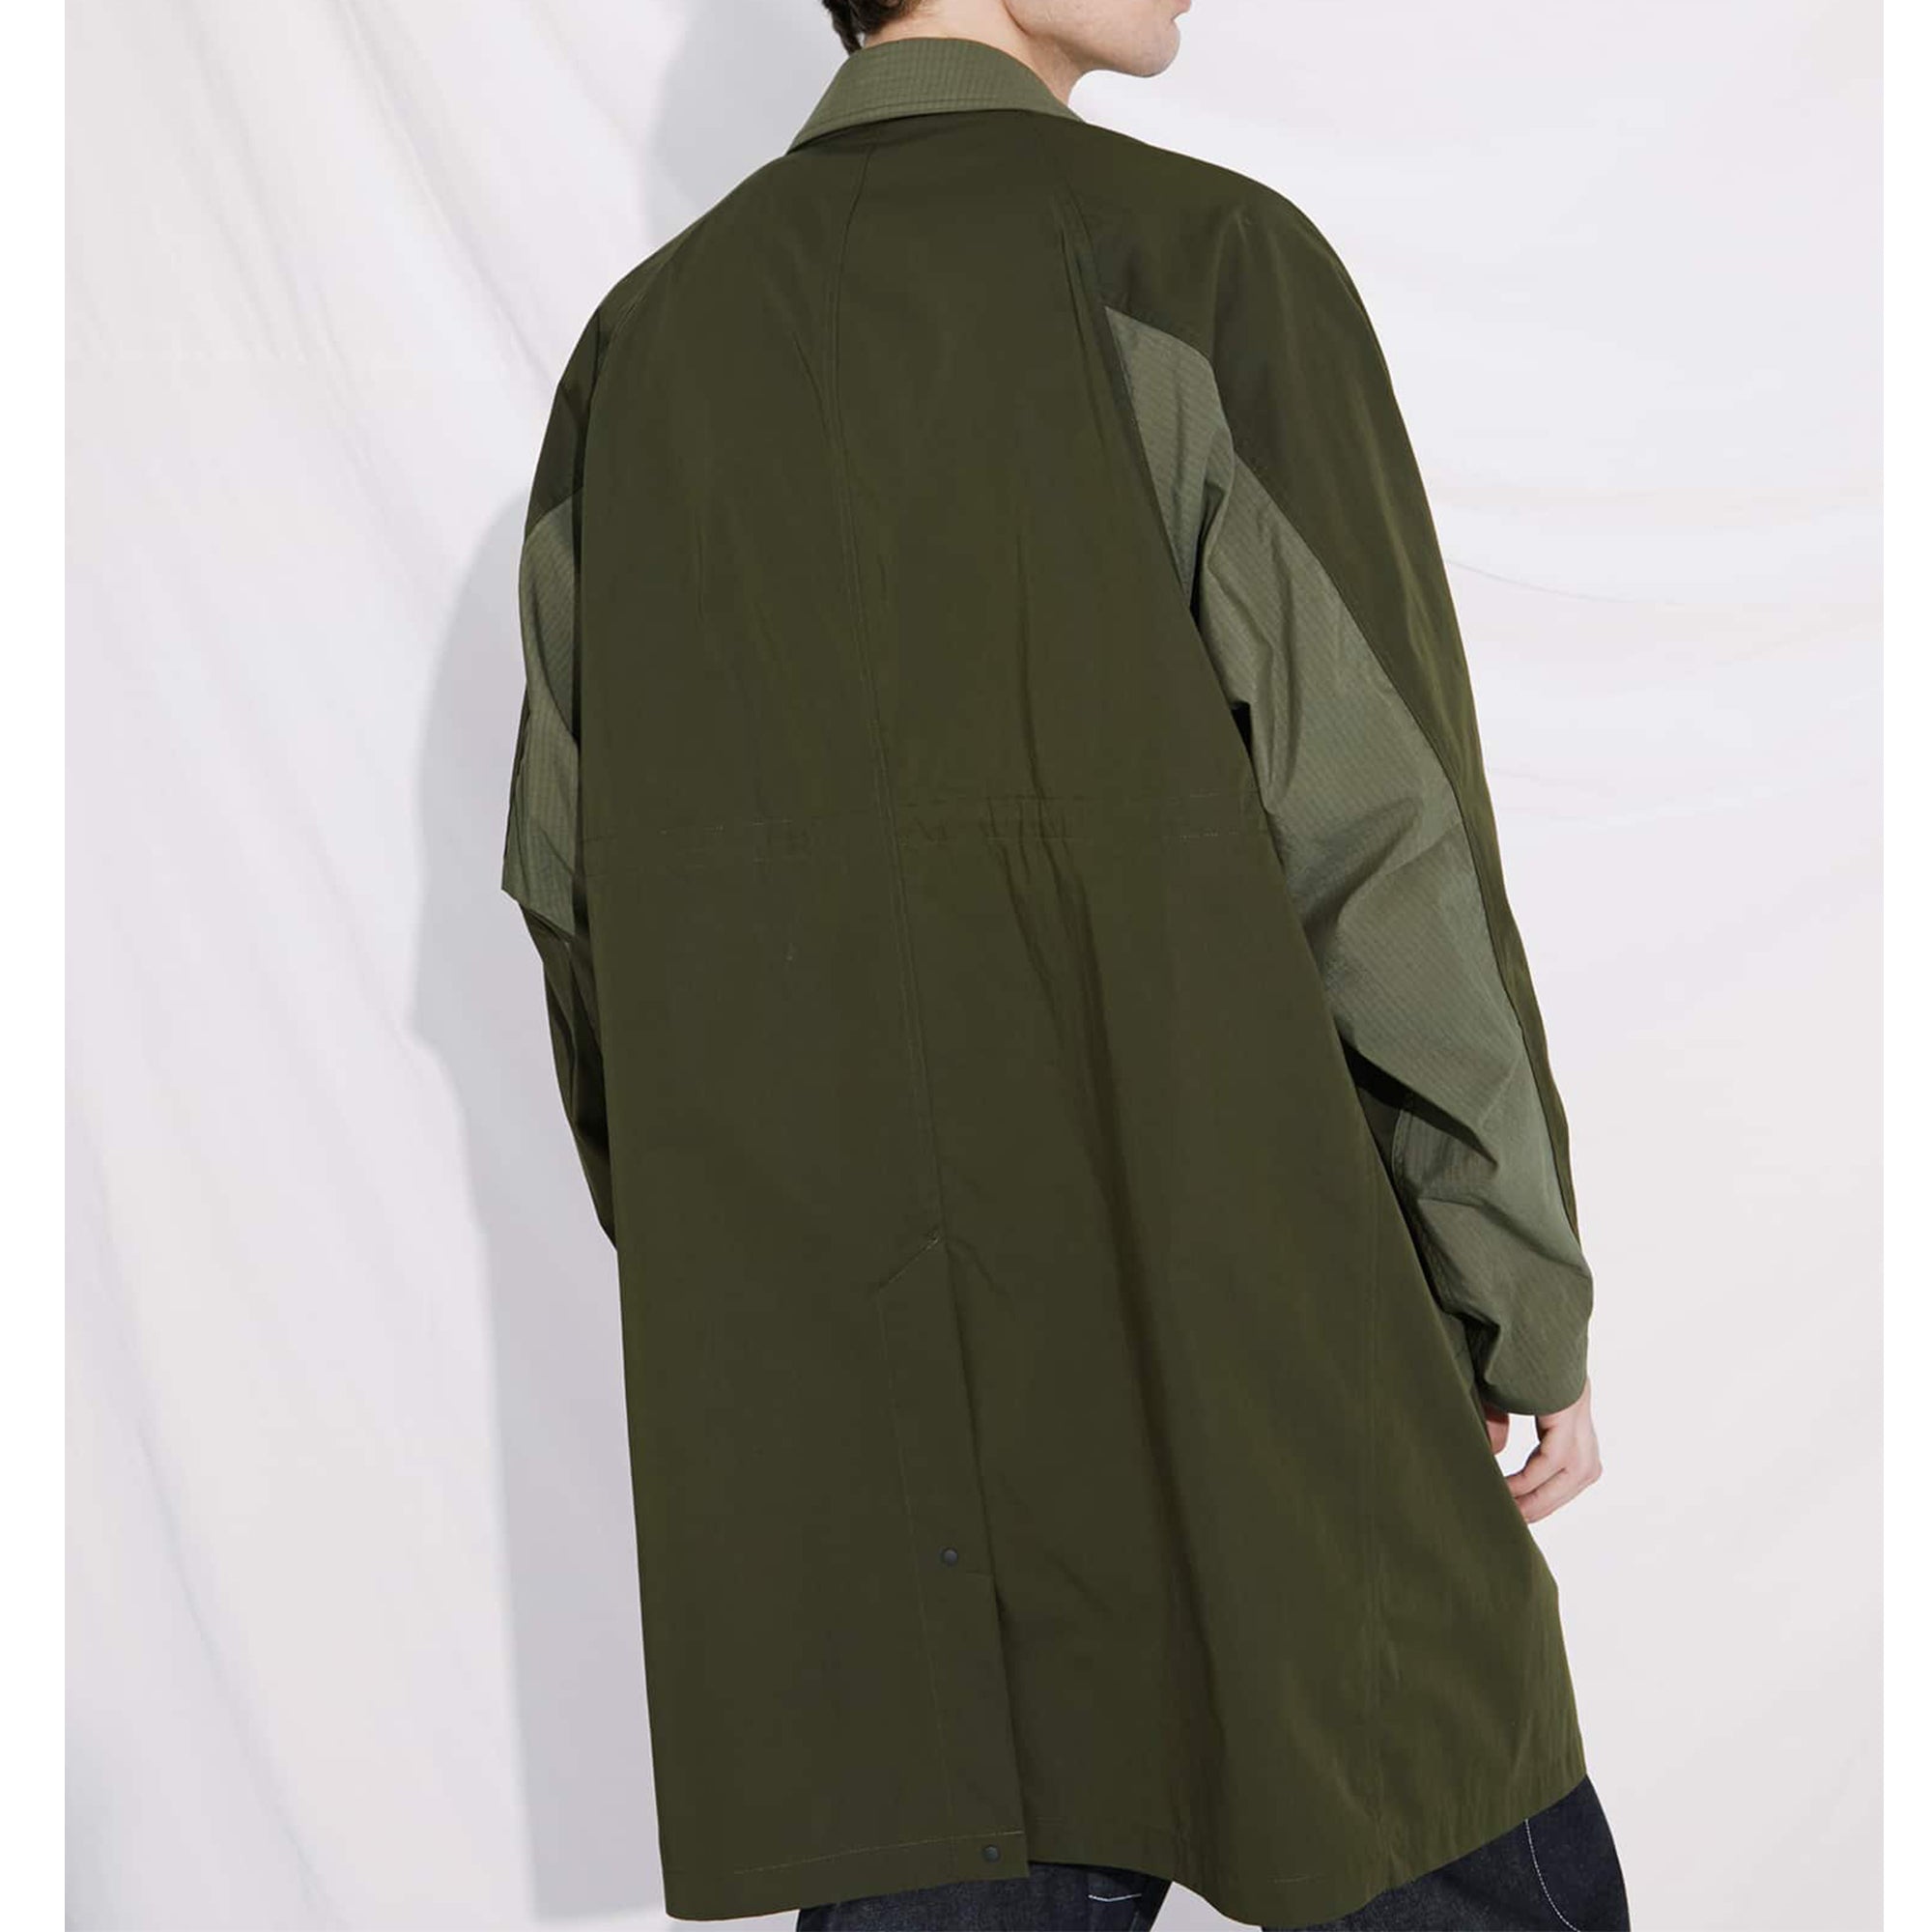 CHESTERFIELD COAT - OLIVE